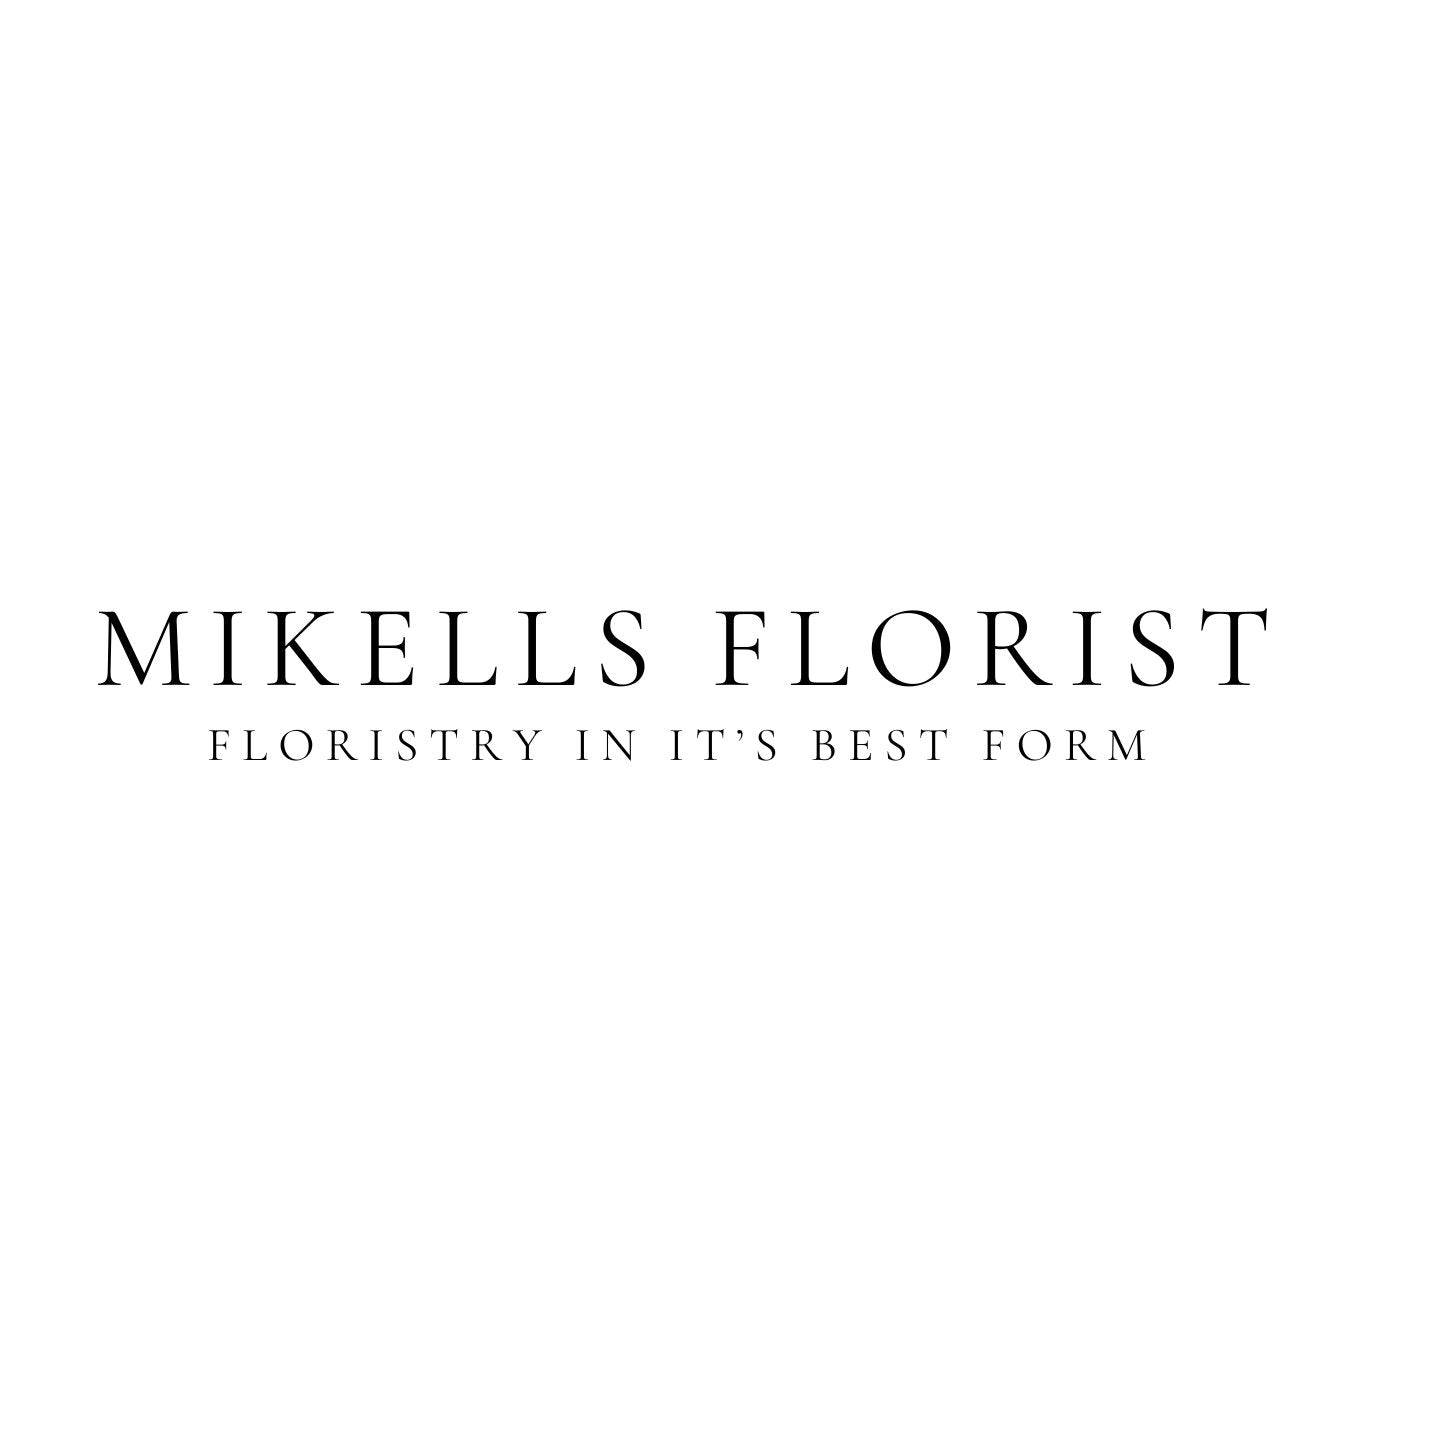 Monthly Flower Subscription - Mikells Florist